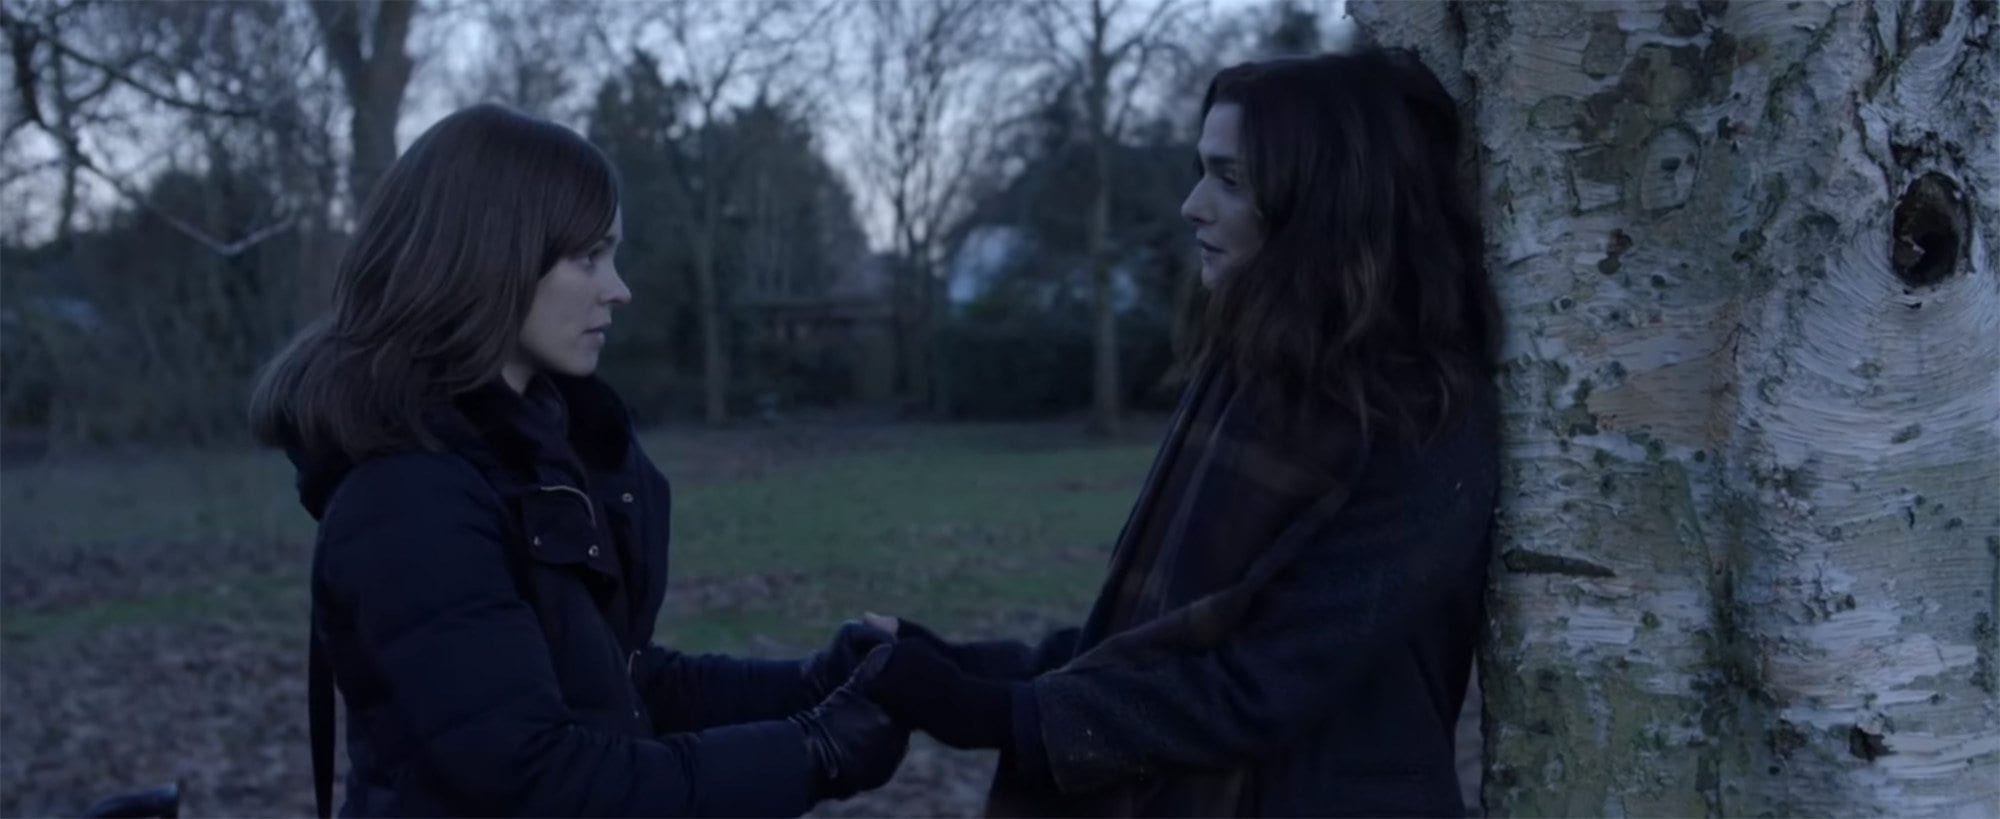 'Disobedience' follows a woman as she returns to the community that shunned her decades earlier for an attraction to a childhood friend.